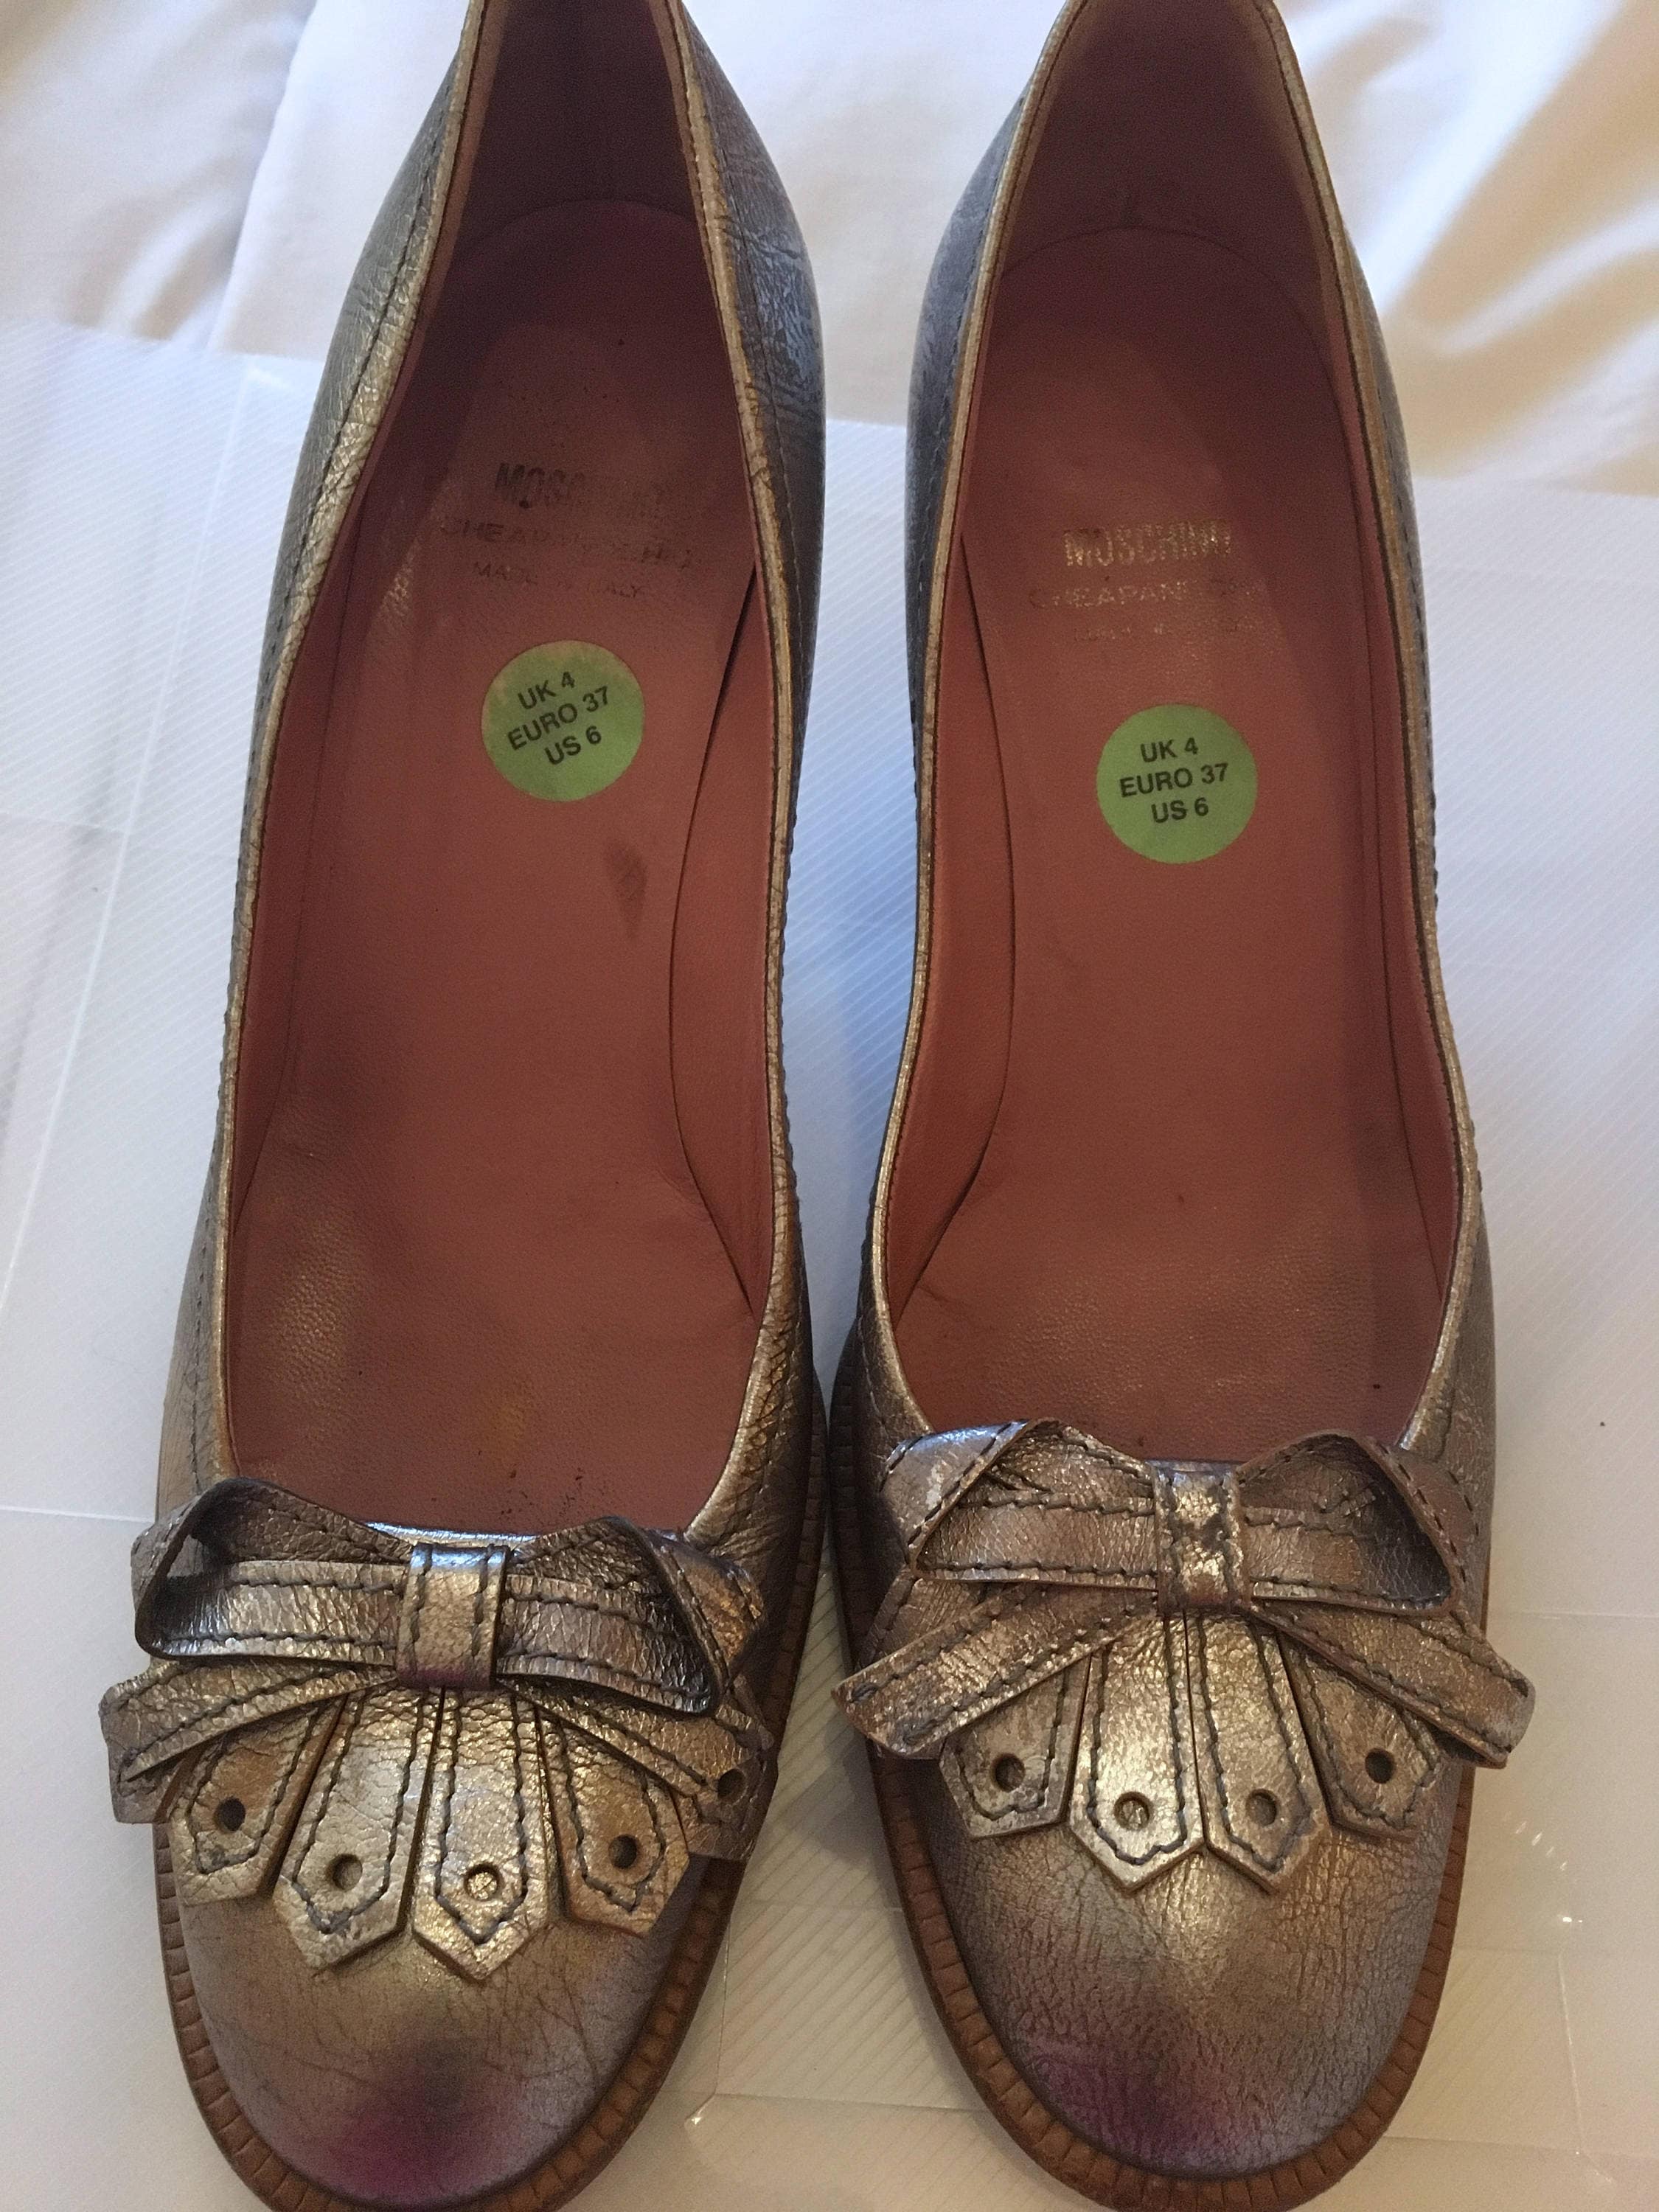 Moschino Shoes Heels, Moschino Size 4 Shoes, Kitten Heel Shoes, Ladies ...